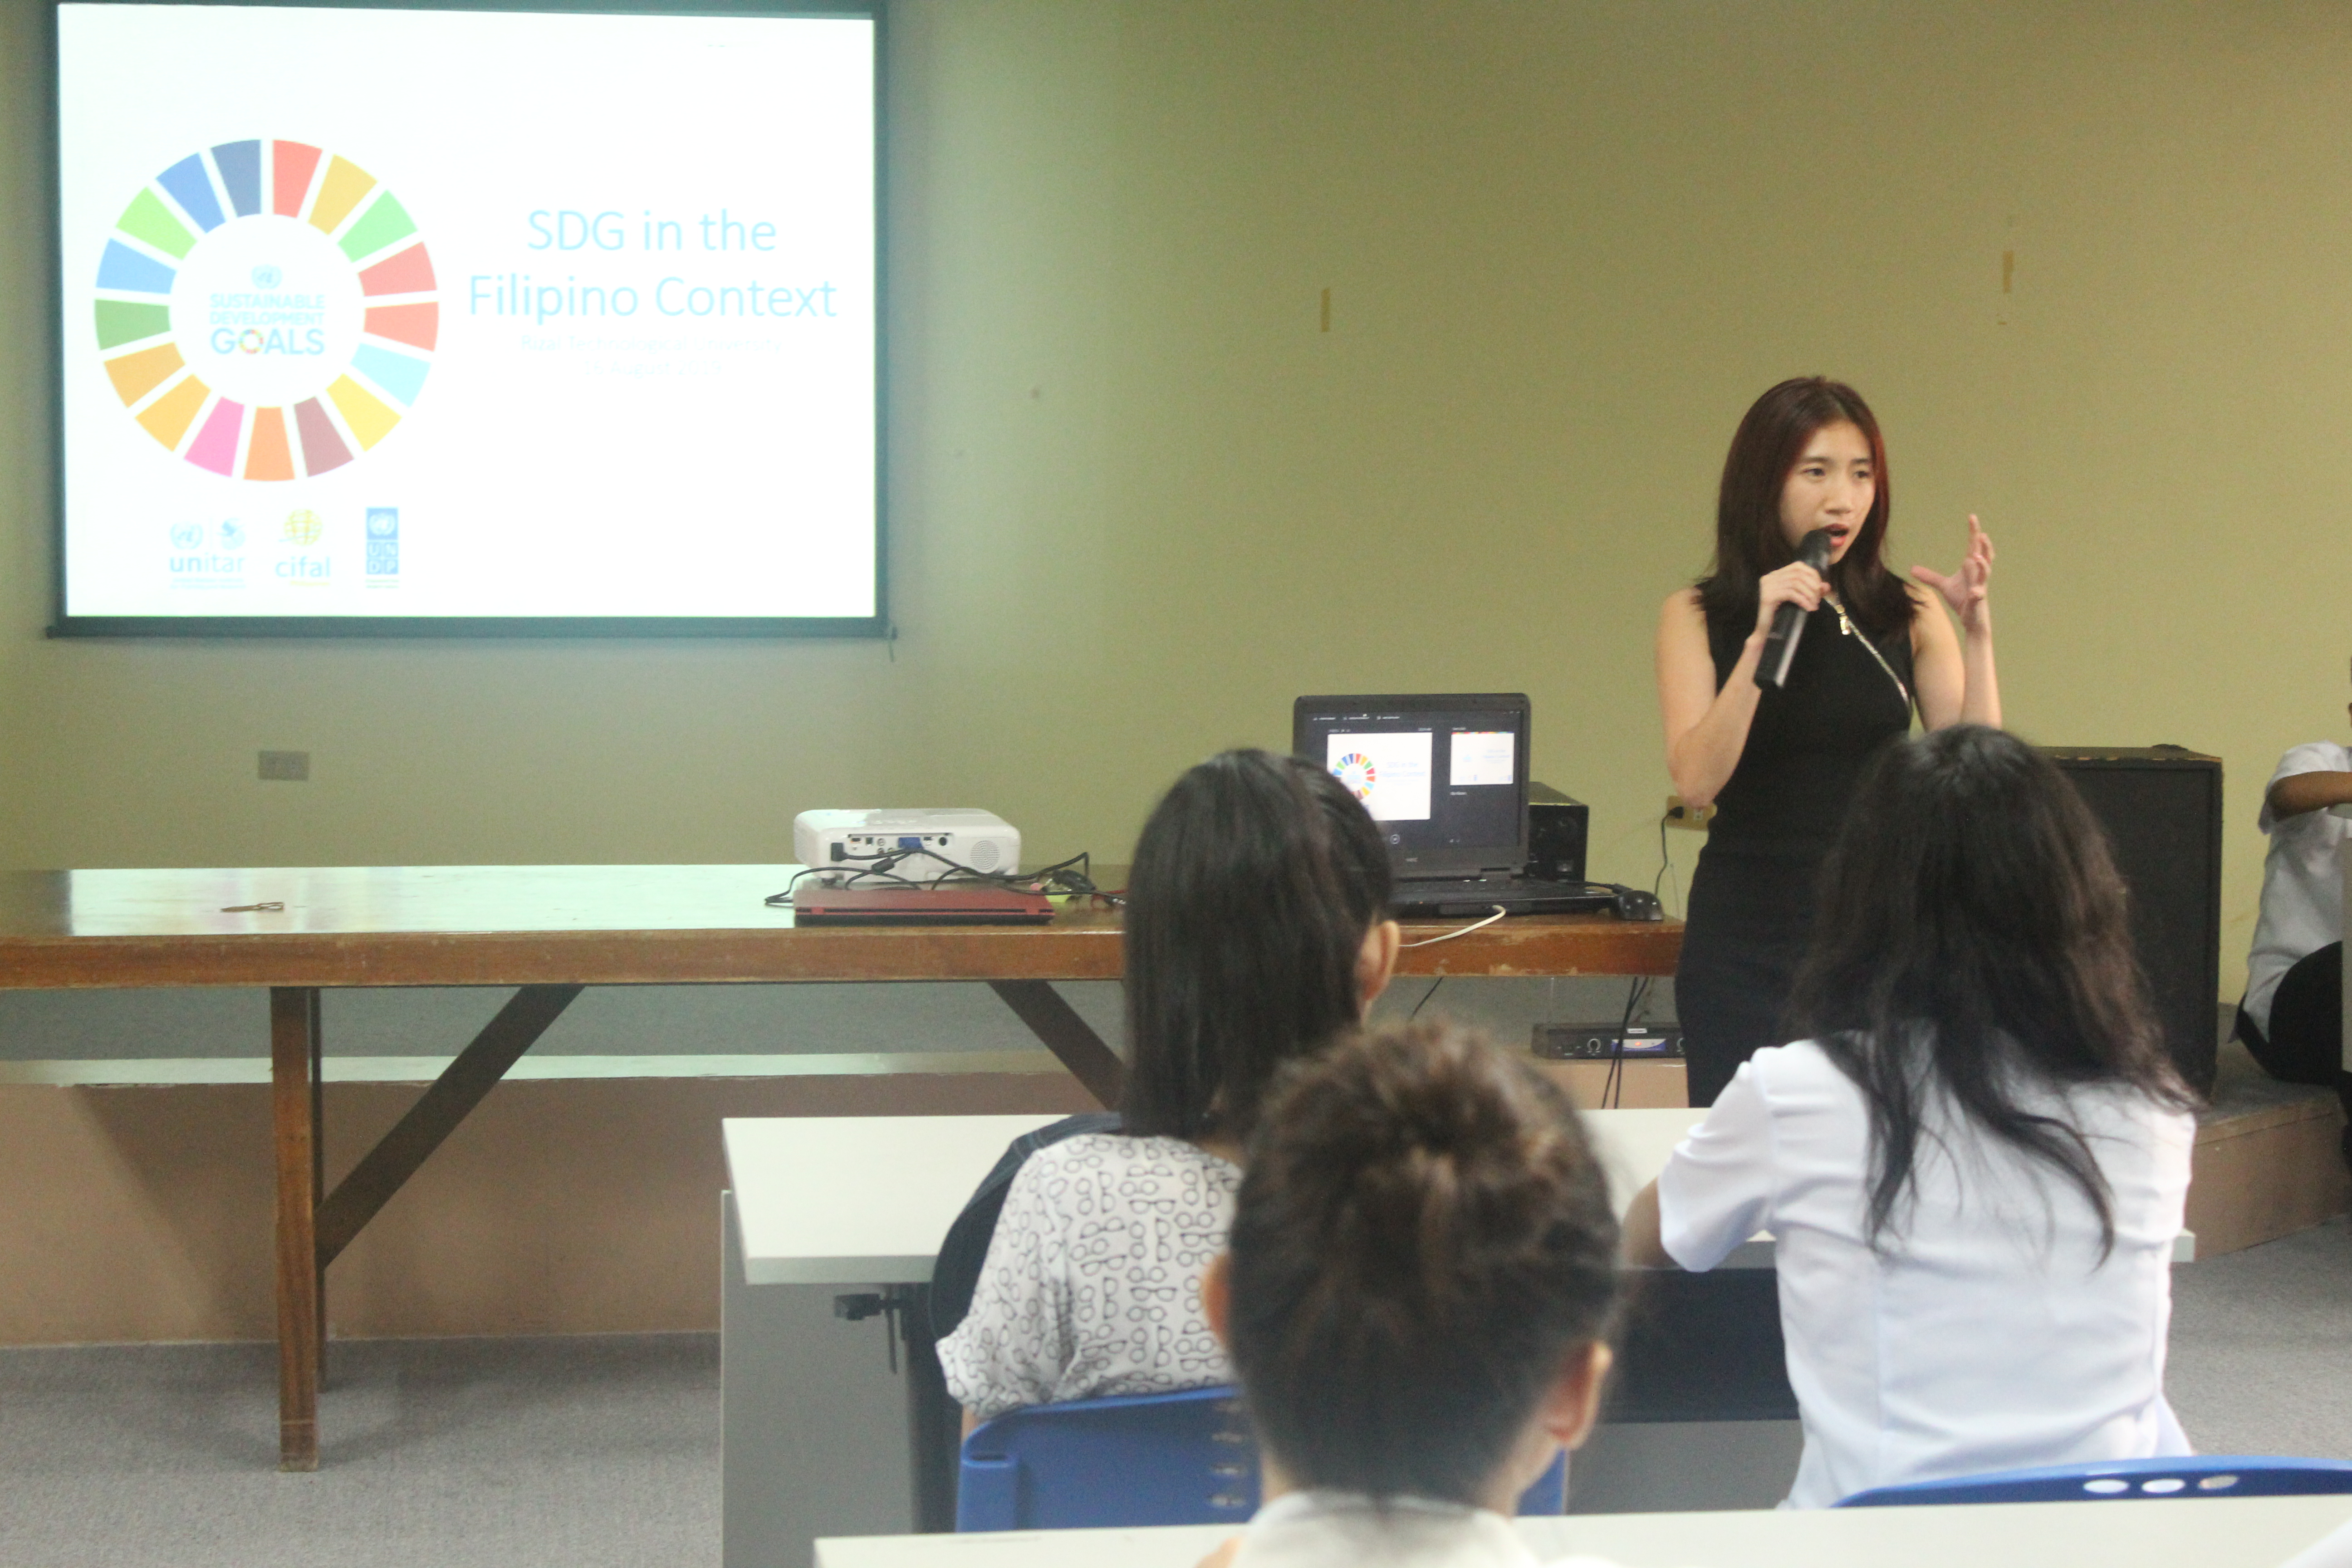 UP-CIFAL Philippines holds SDG capacity-building seminar-workshop for 102 university students